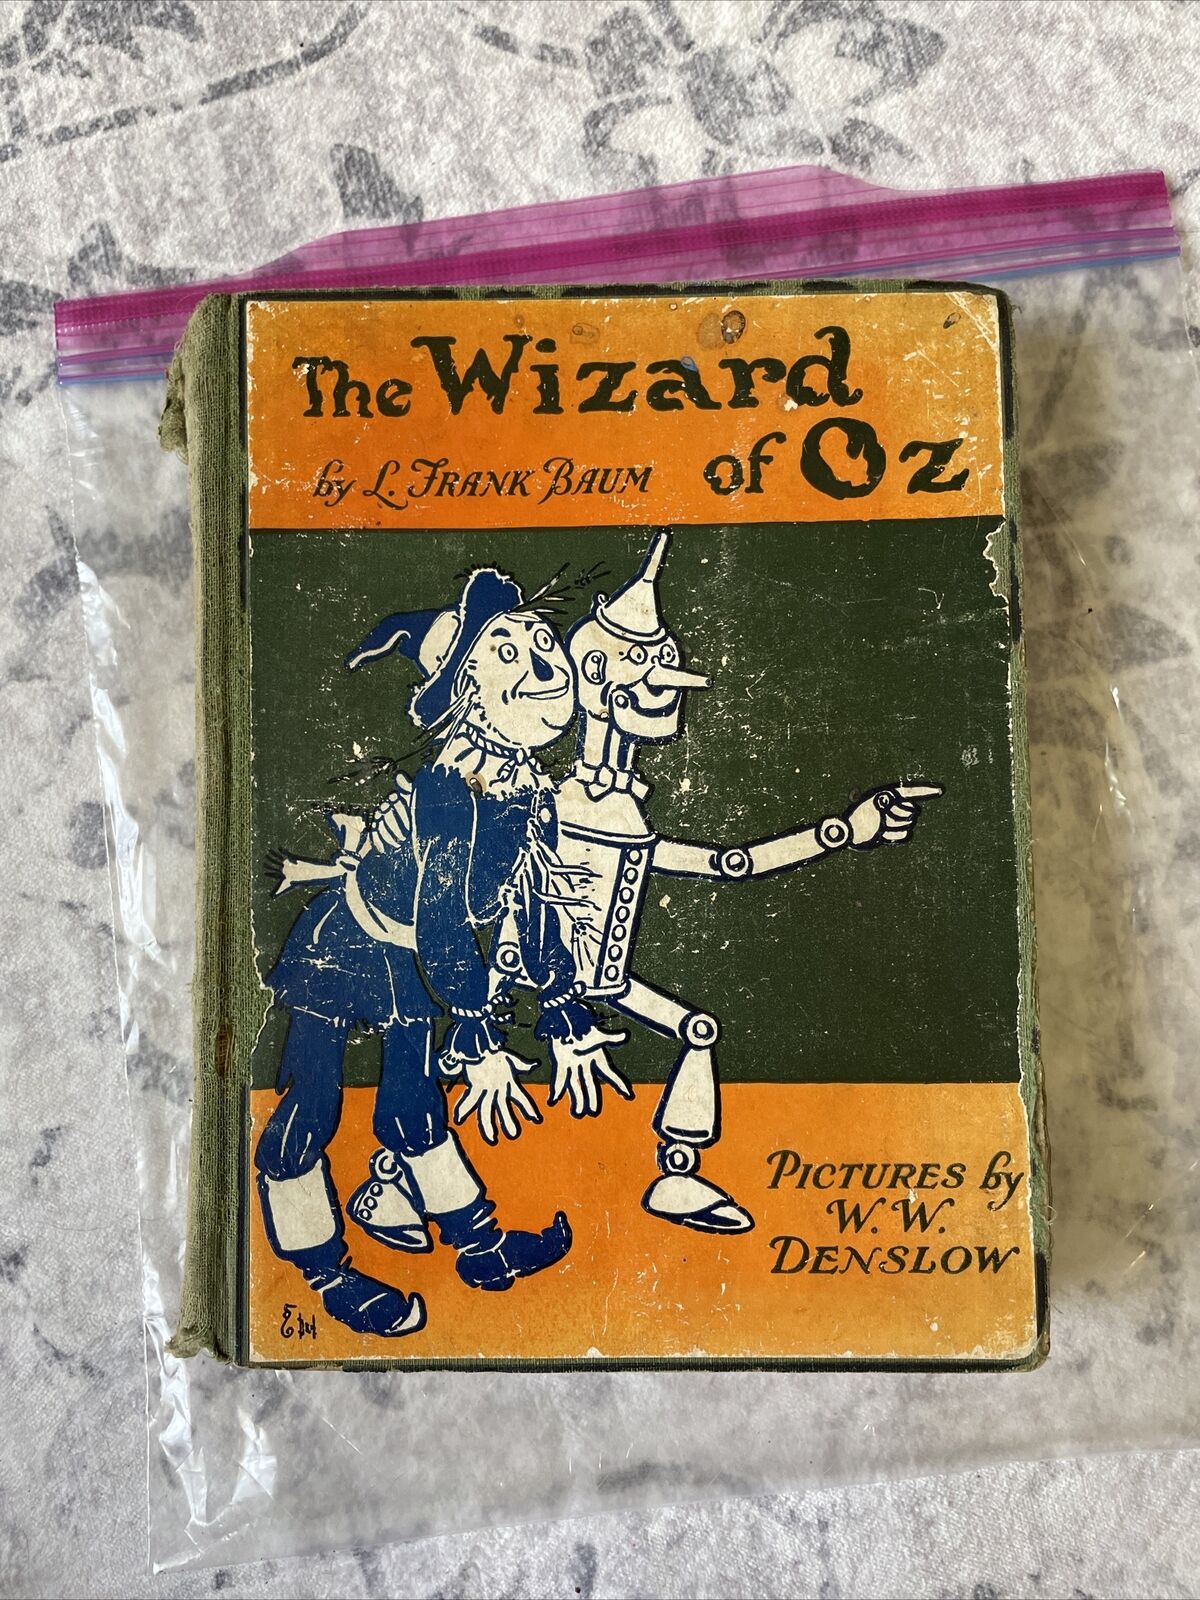 Vintage 1903 The Wizard of Oz Early Hardcover Book by L. Frank Baum